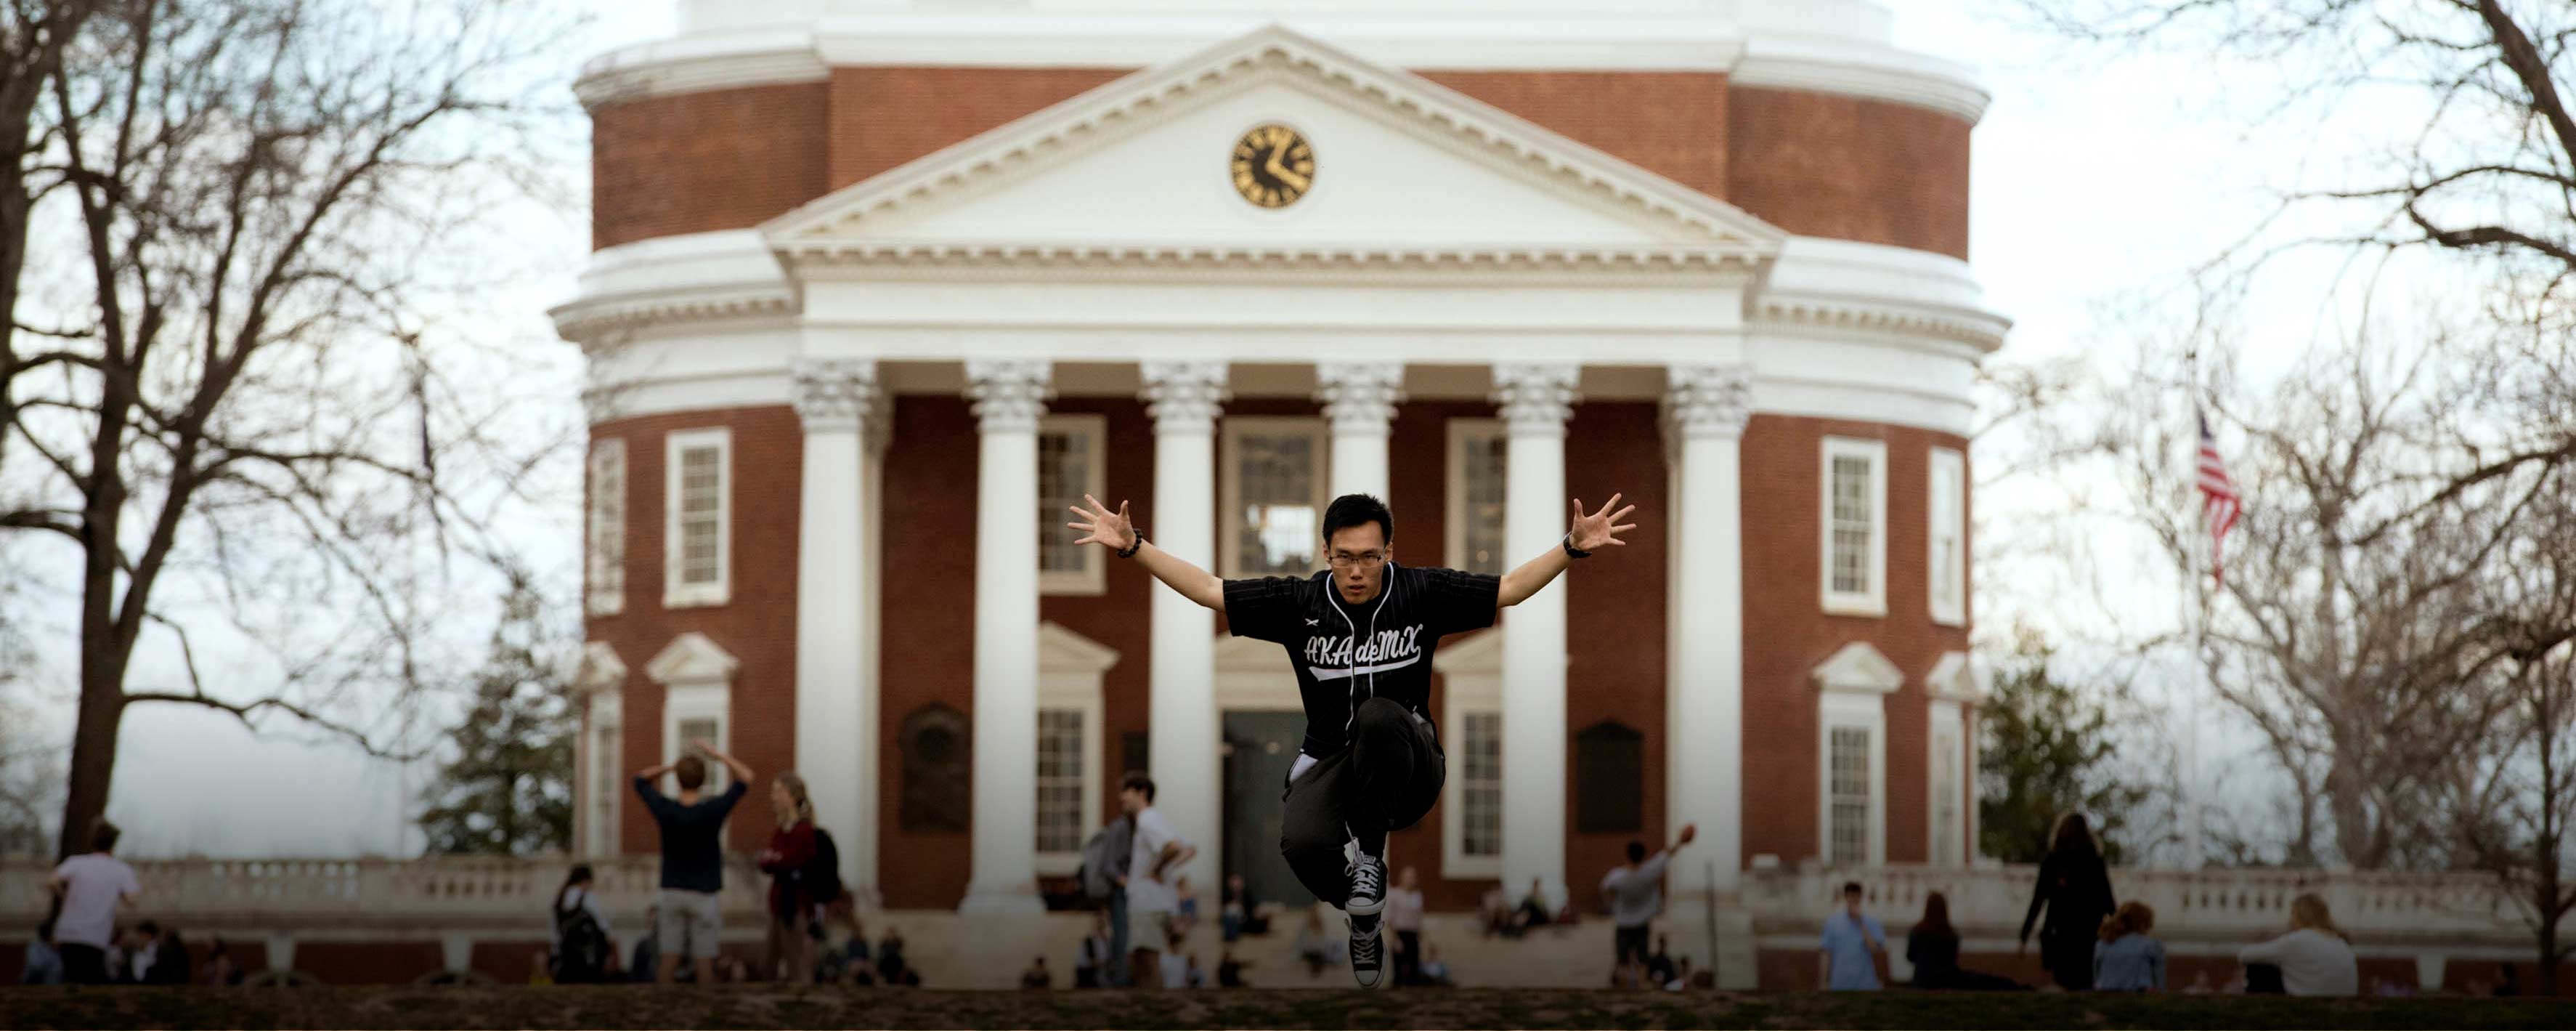 Man jumping with his hands out wide looking at the camera in front of the Rotunda